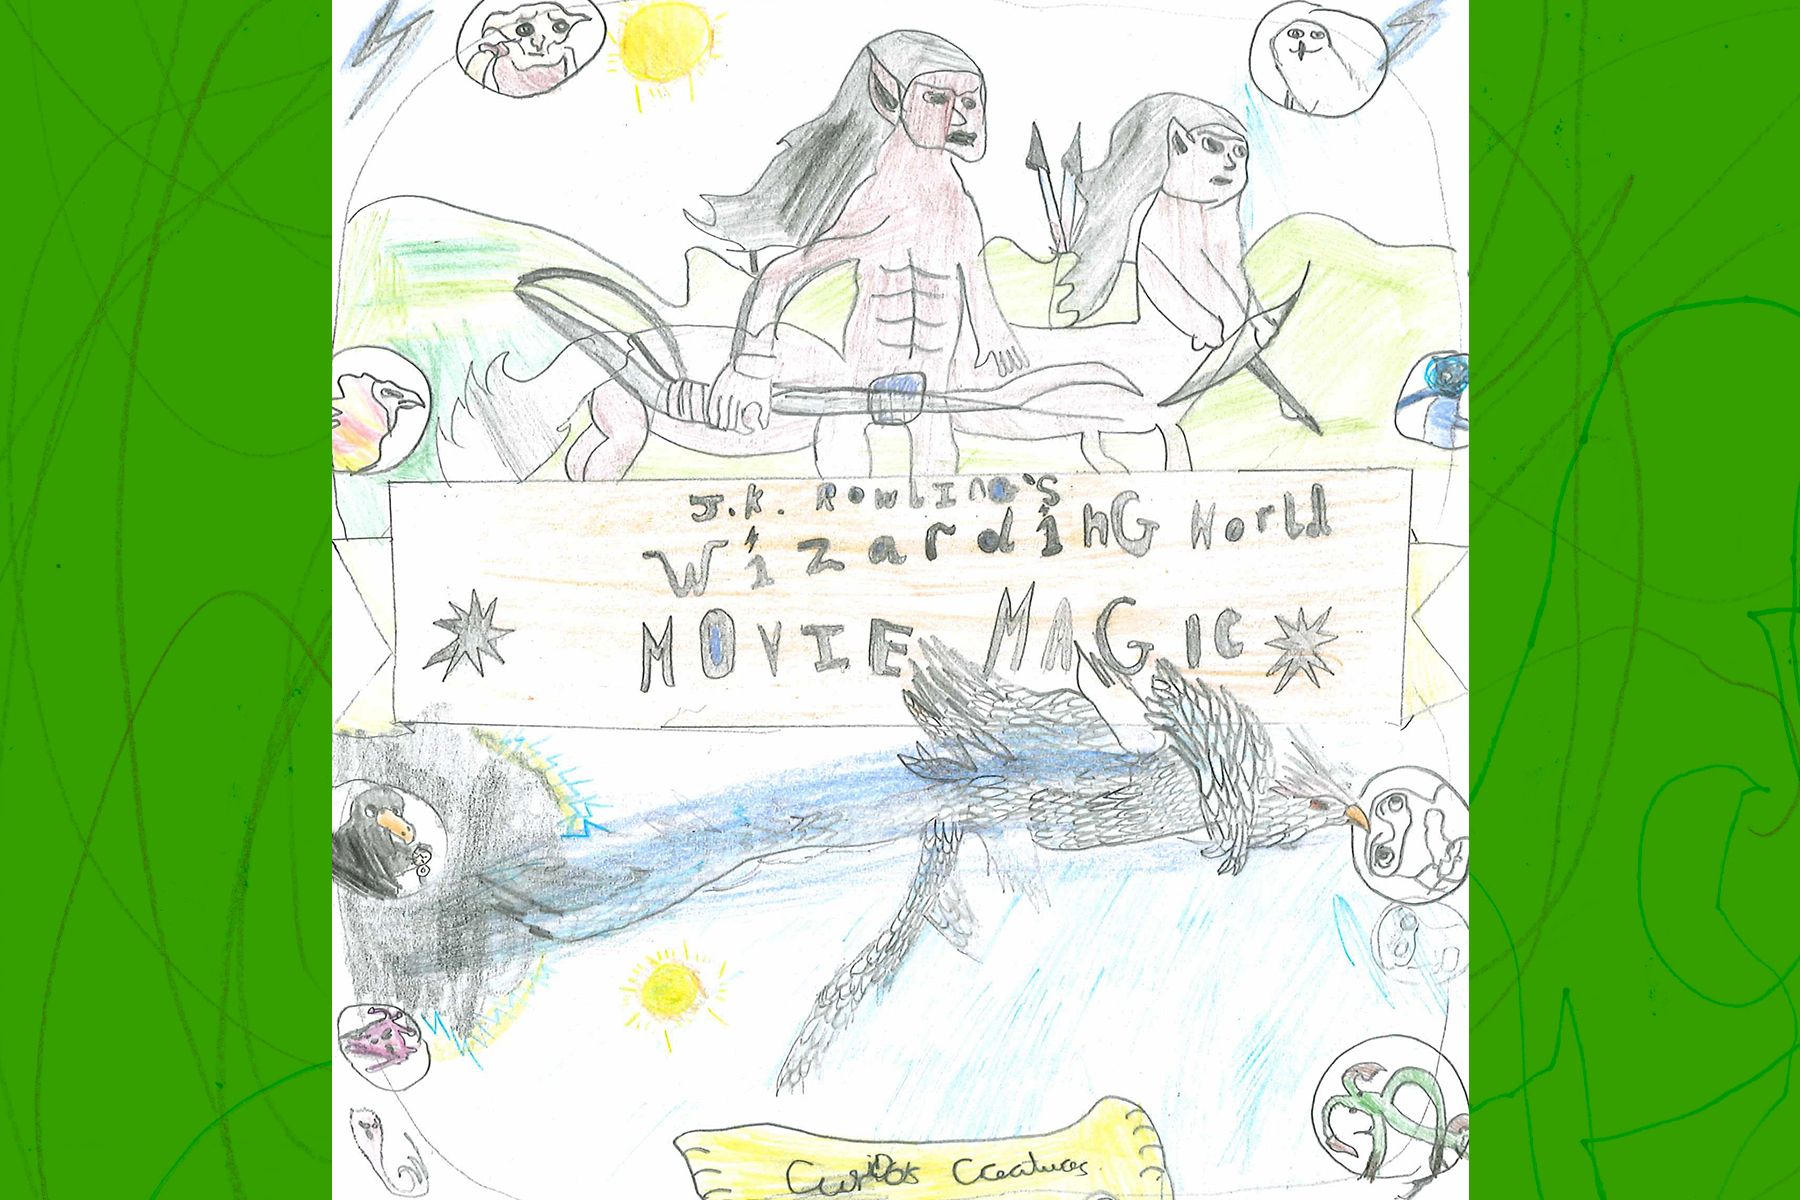 A book cover drawn by a child